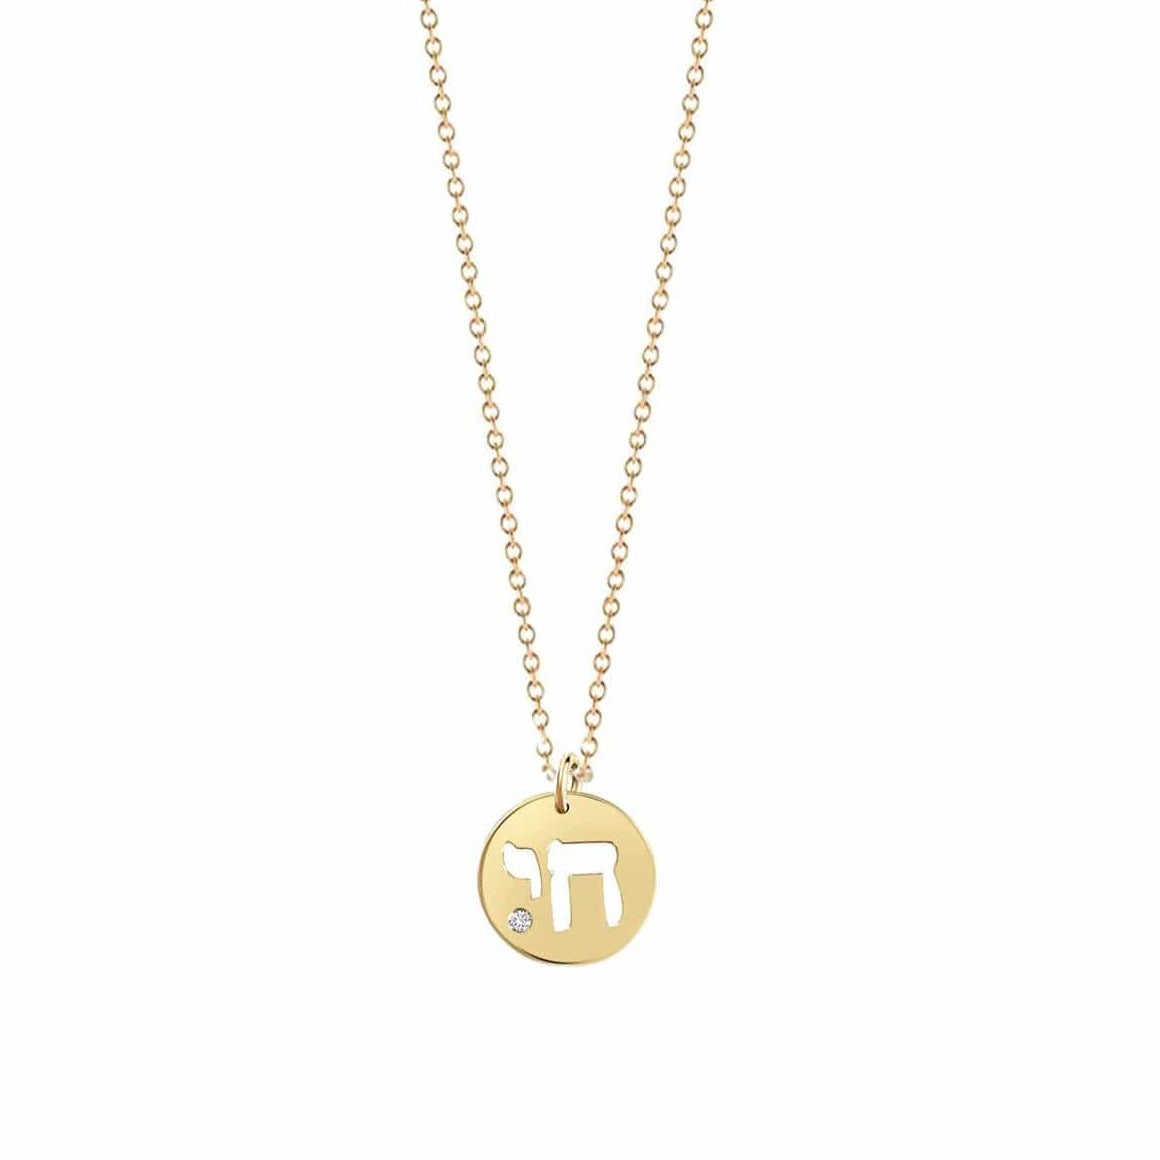 Miriam Merenfeld Jewelry Necklaces Gold Vermeil / 16" Chai Diamond Necklace - Sterling Silver, Gold Vermeil or Two-Tone